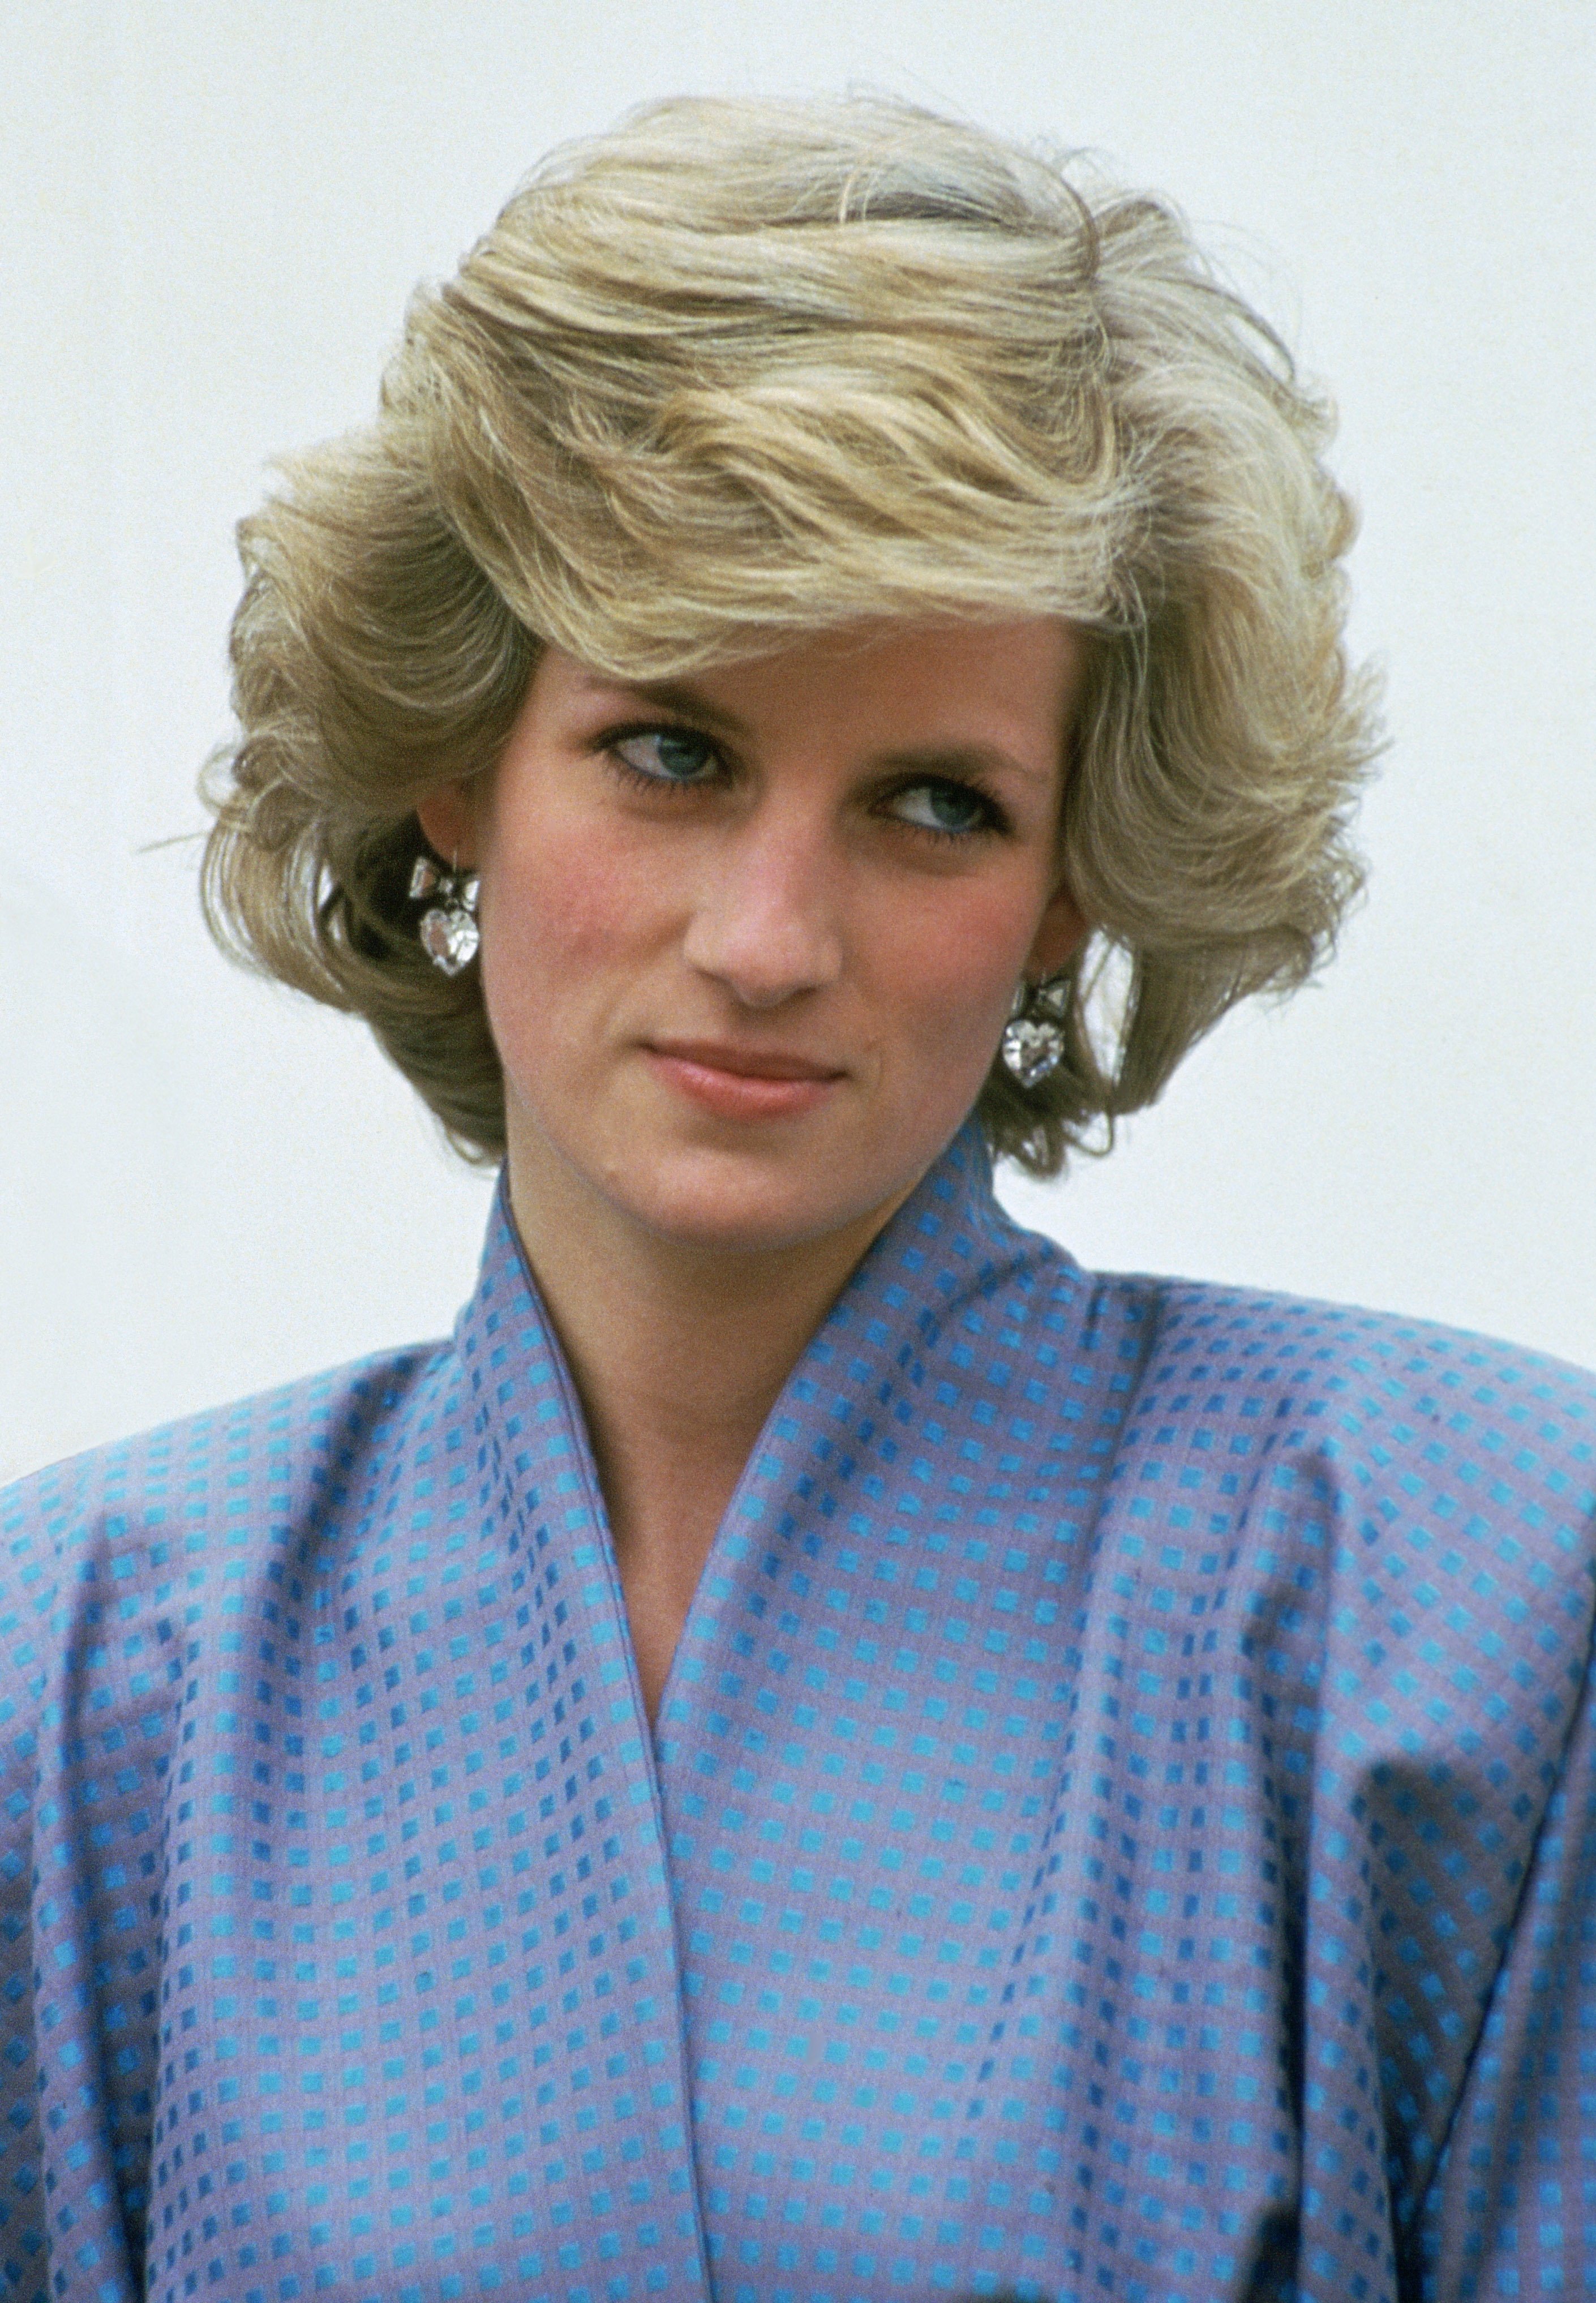 Princess Diana photographed in Italy during an official overseas visit. | Source: Tim Graham Photo Library/Getty Images